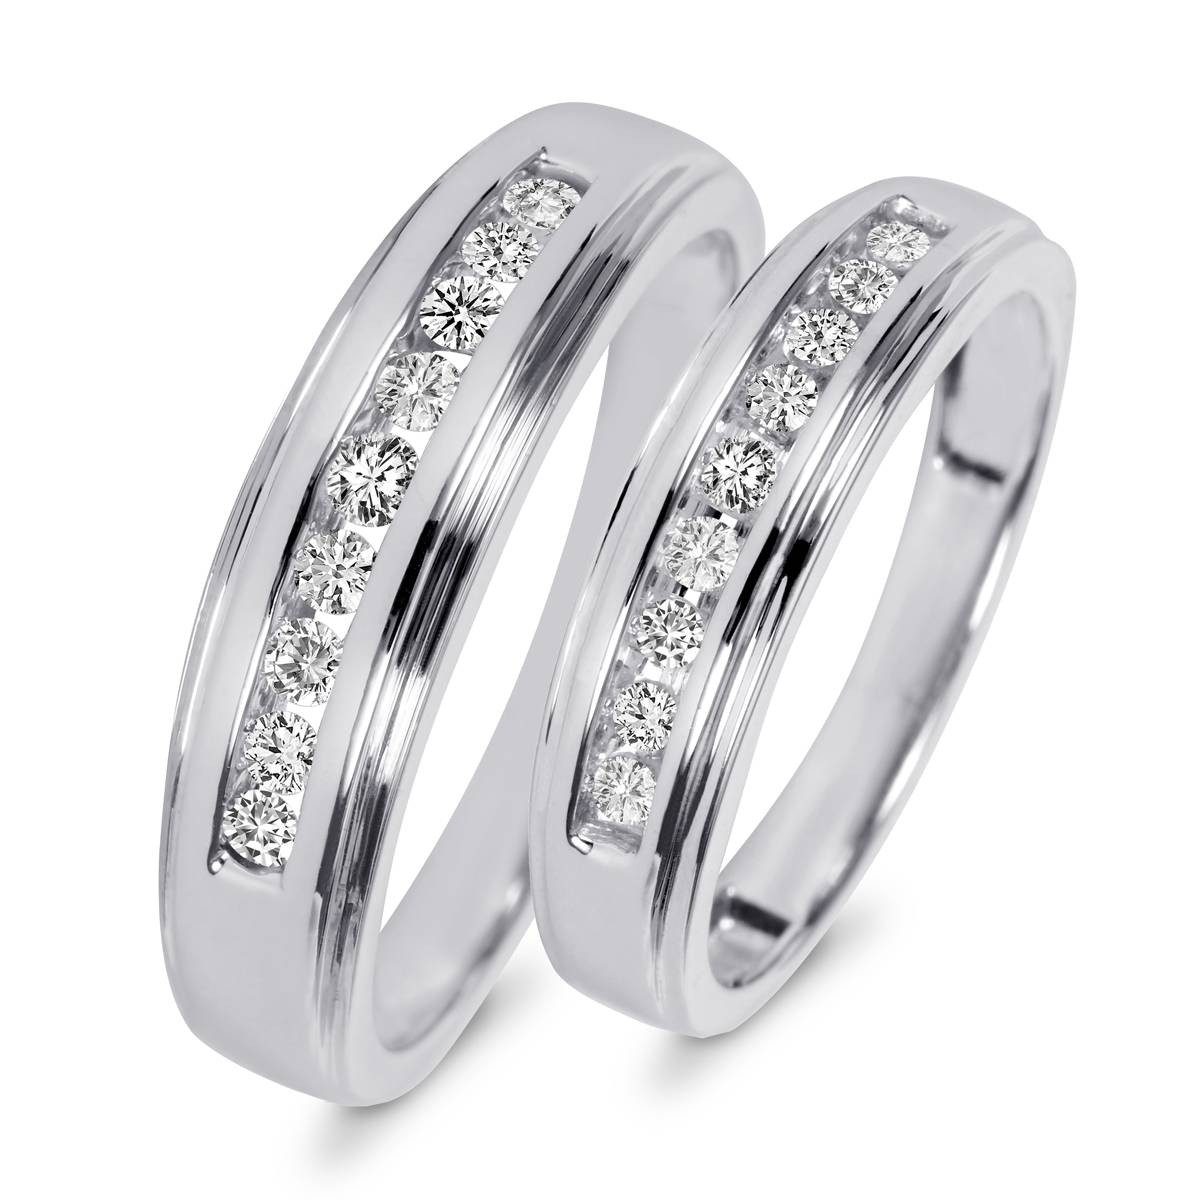 Wedding Bands Sets His And Hers
 15 Inspirations of Cheap Wedding Bands Sets His And Hers